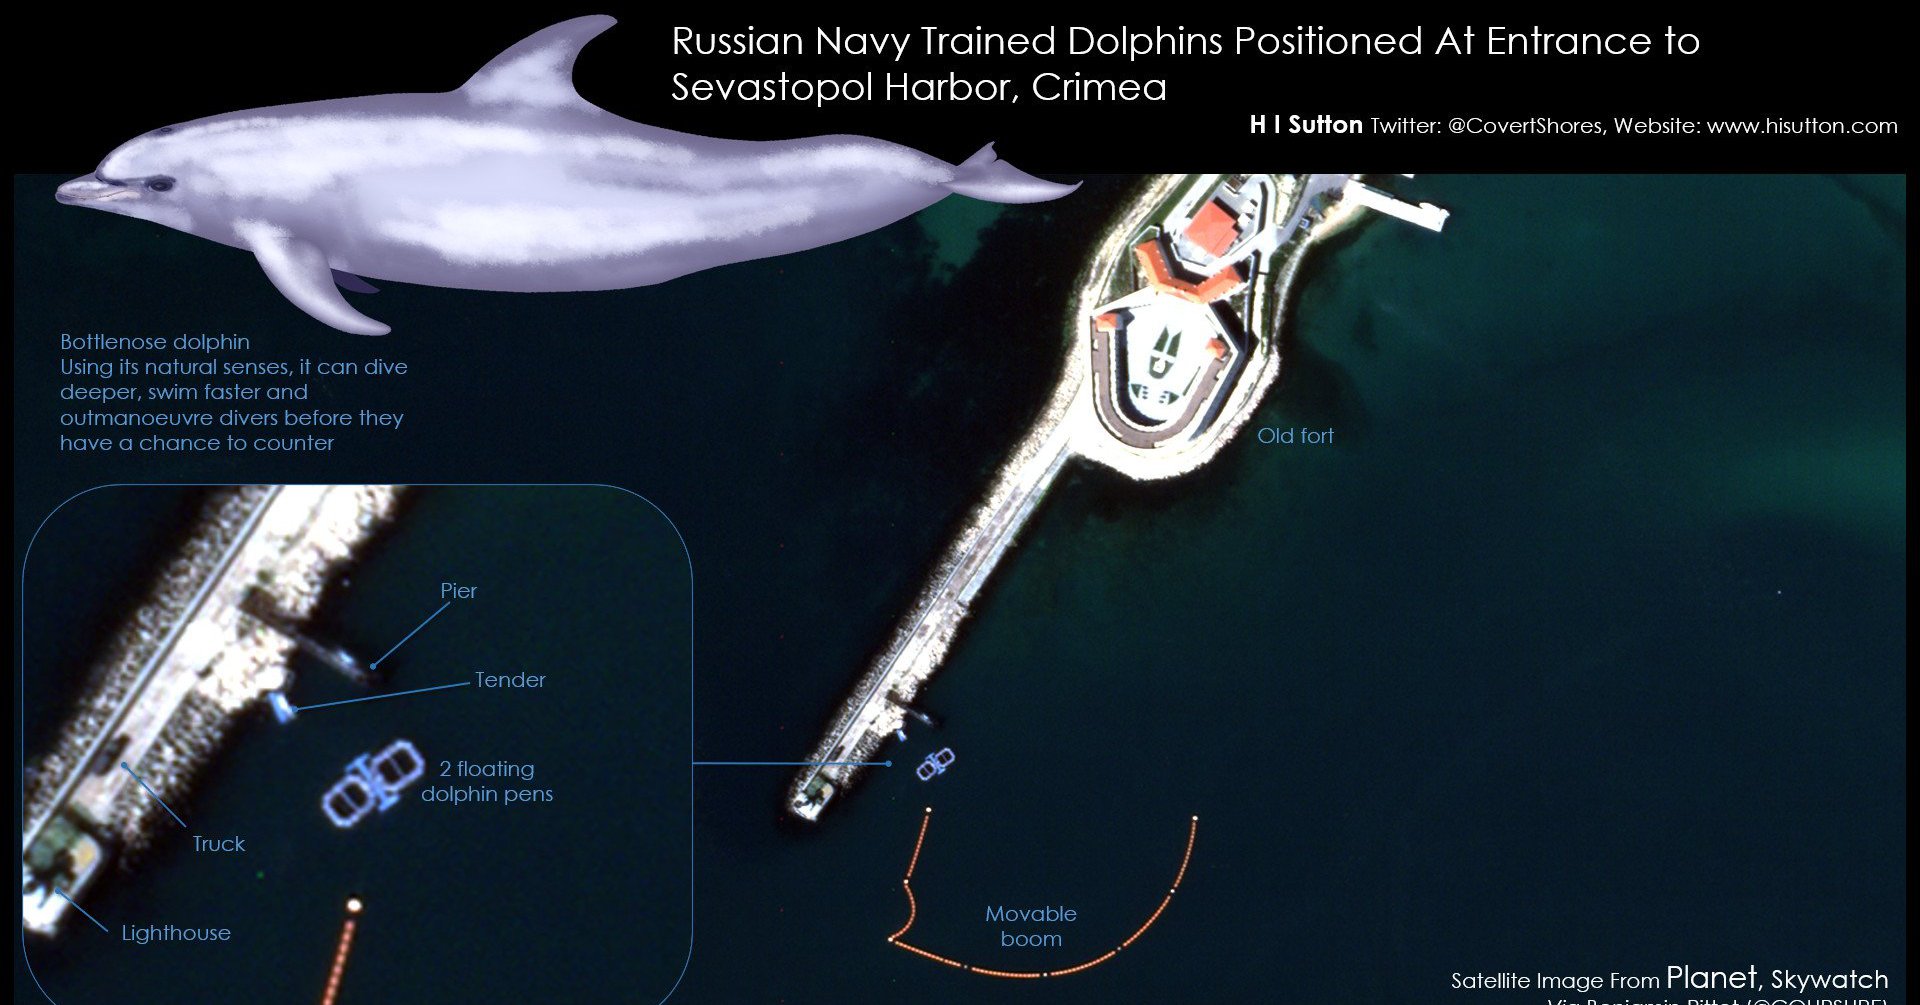 Russia-Ukraine conflict: Russia deploys dolphins to protect an important naval base in the Black Sea